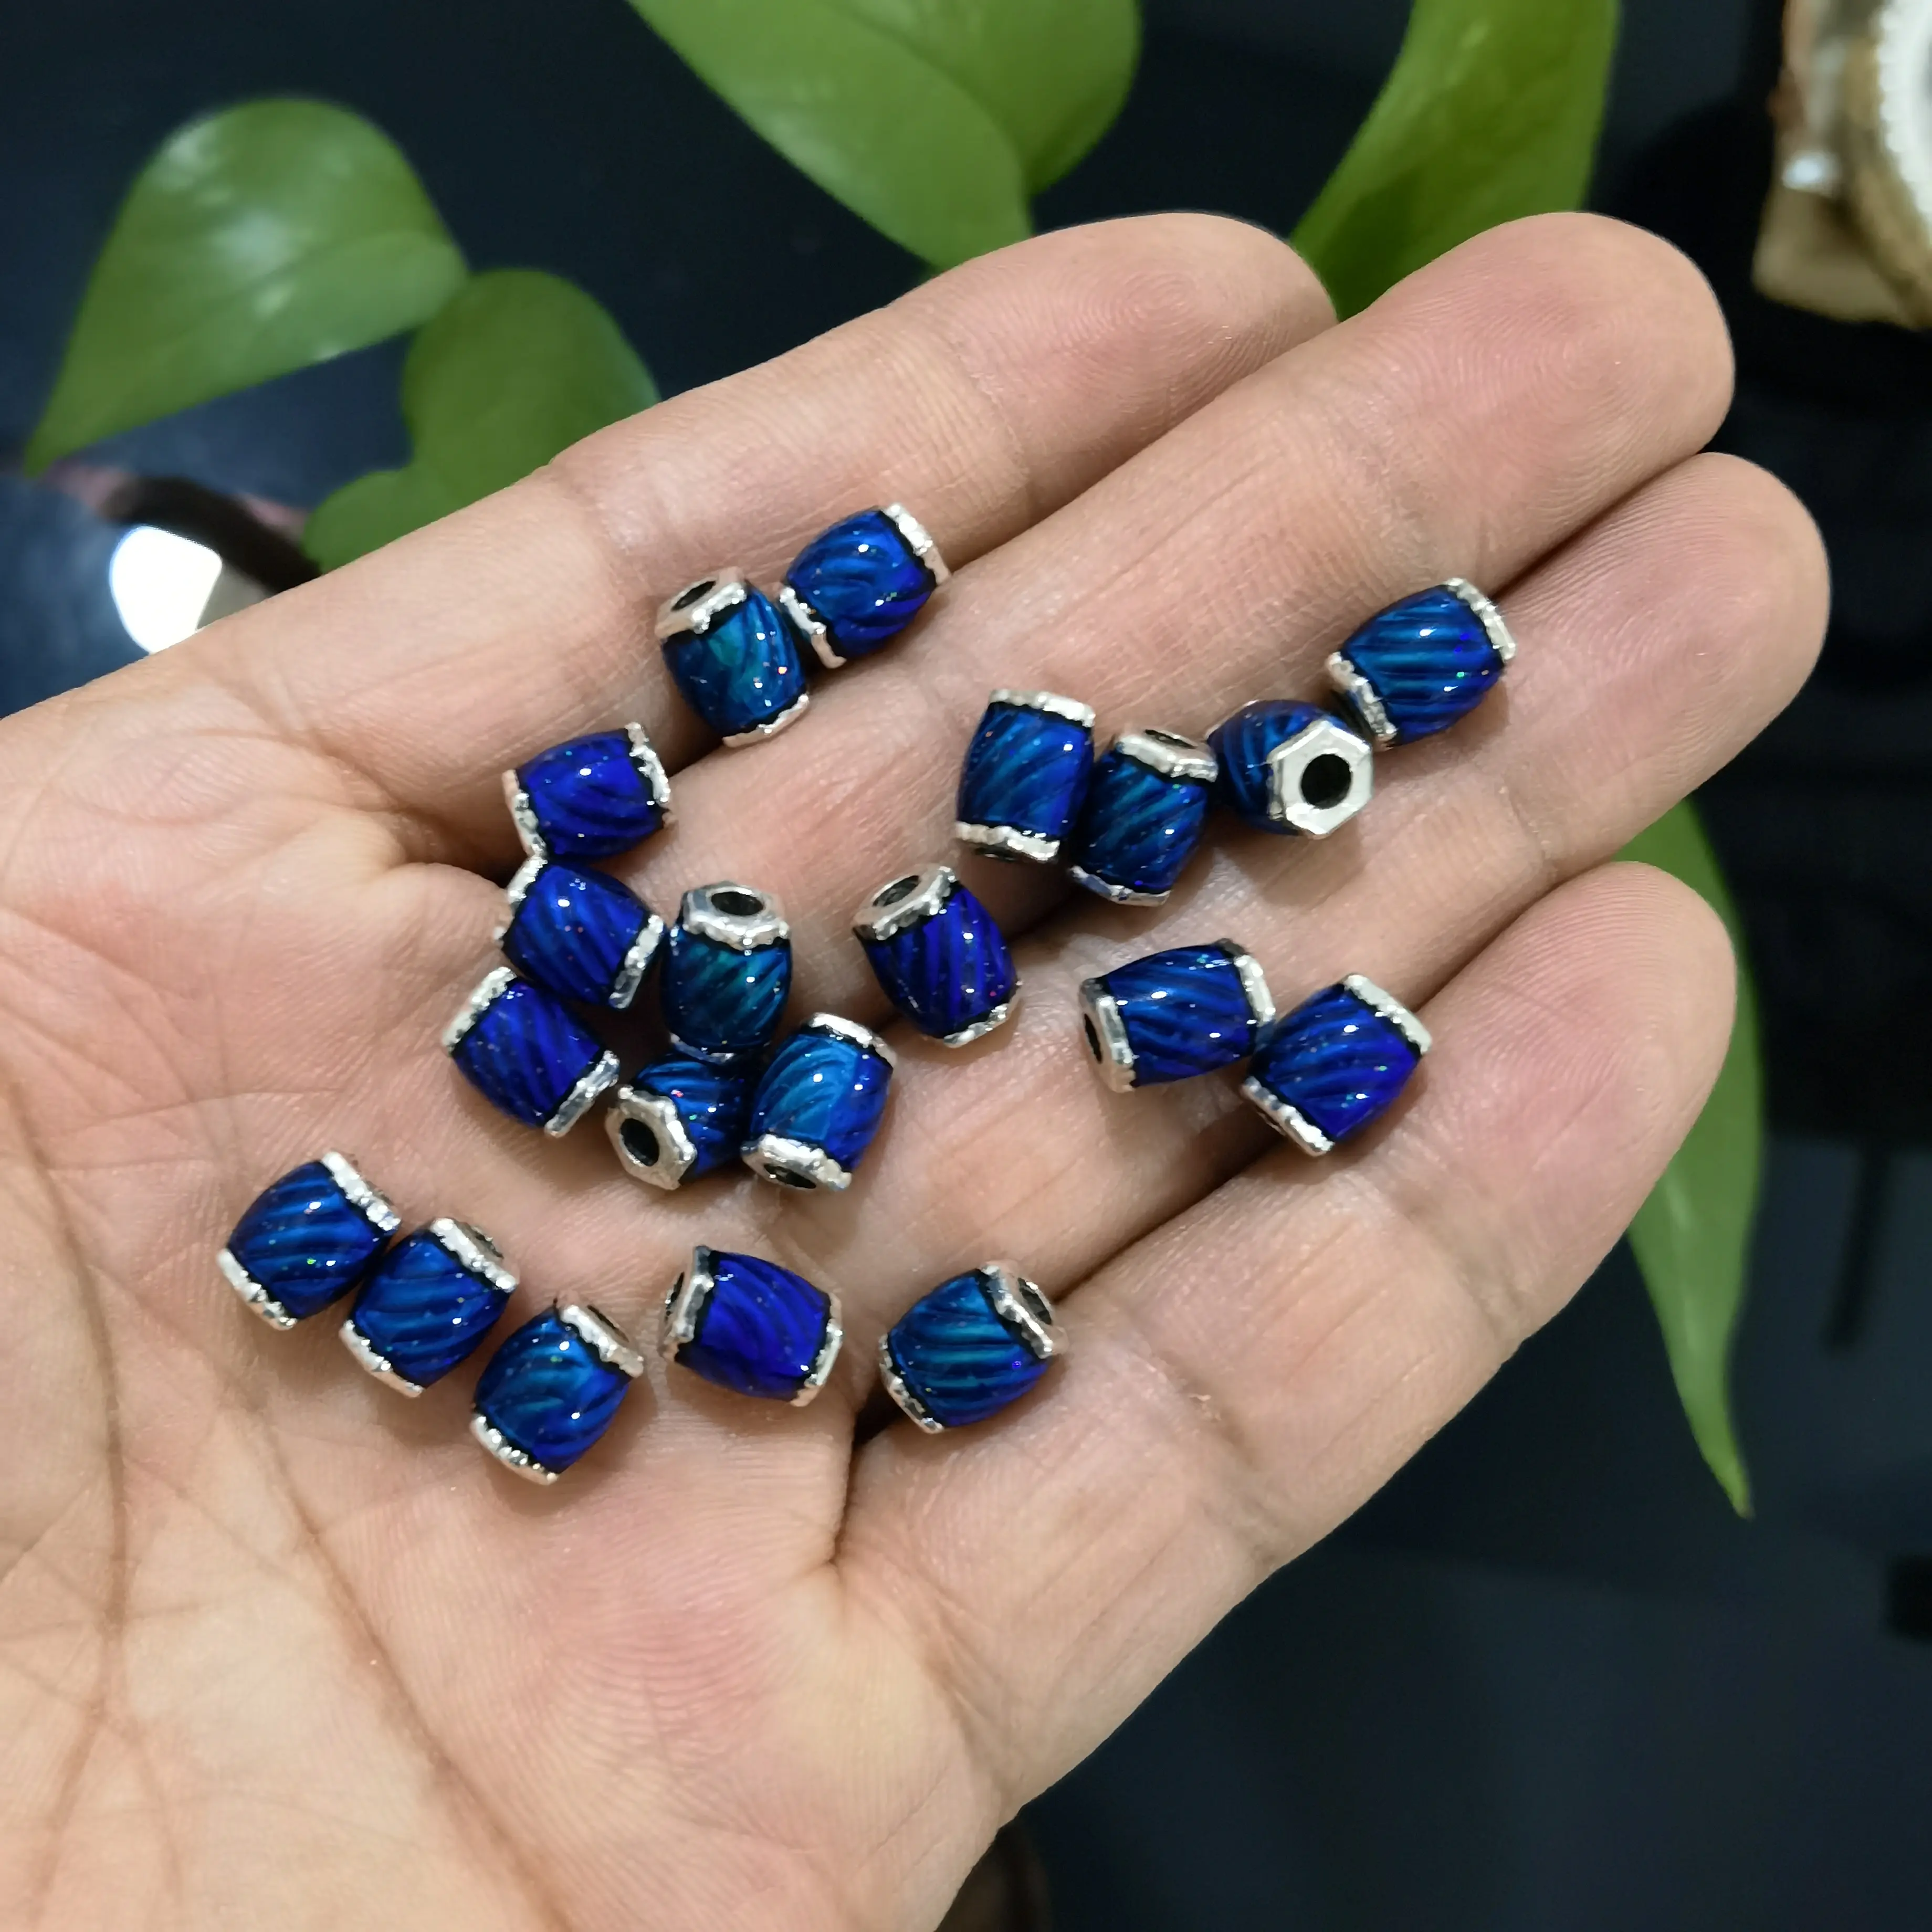 New Arrival Handmade DIY Jewelry Color Changing Loose Beads Barrel Mood Stone Beads for Creative Gift